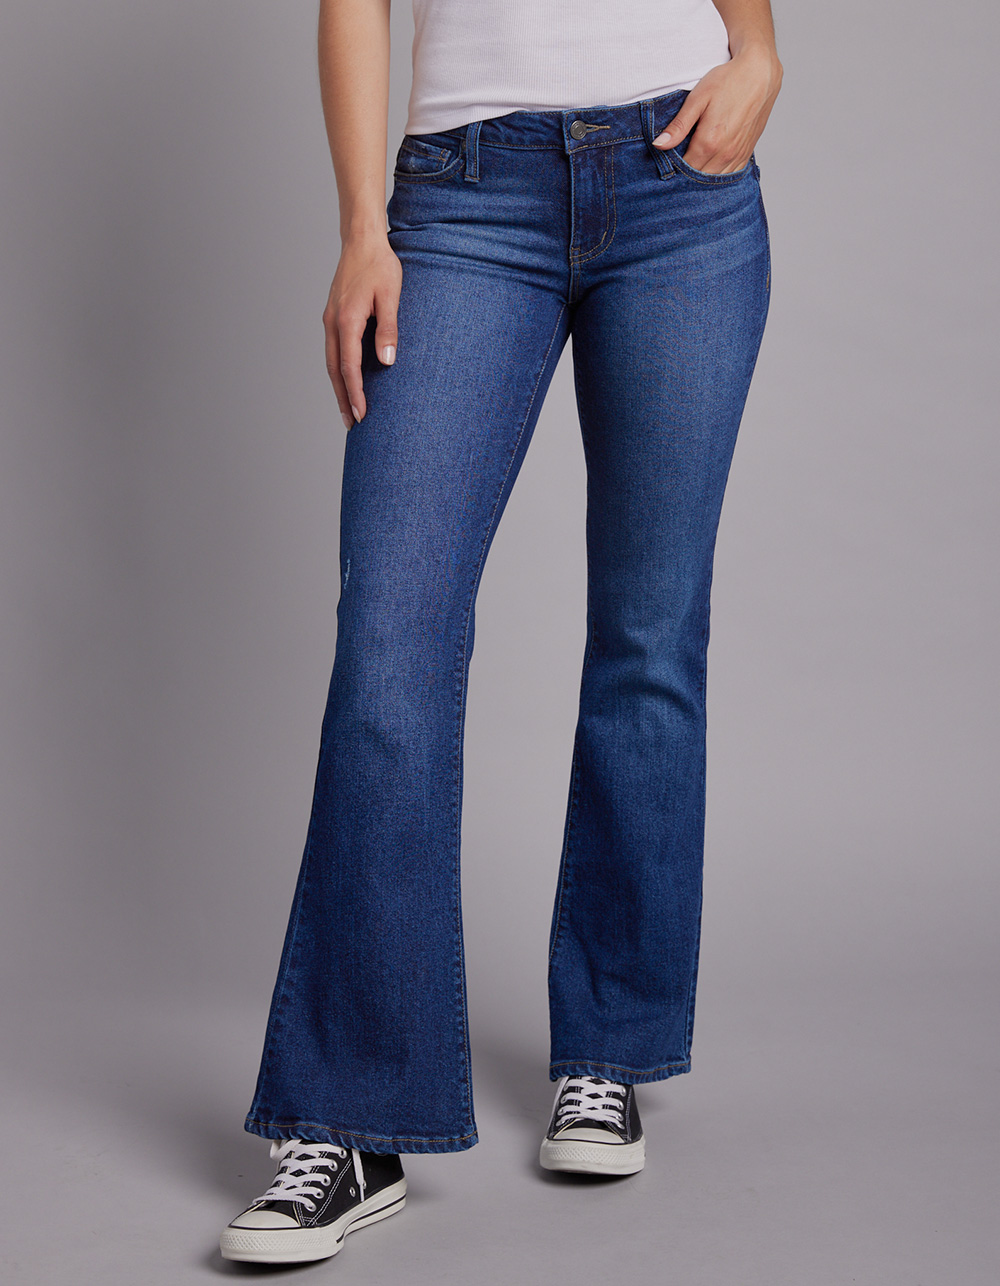 RSQ Womens Low Rise Flare Jeans - MEDIUM WASH